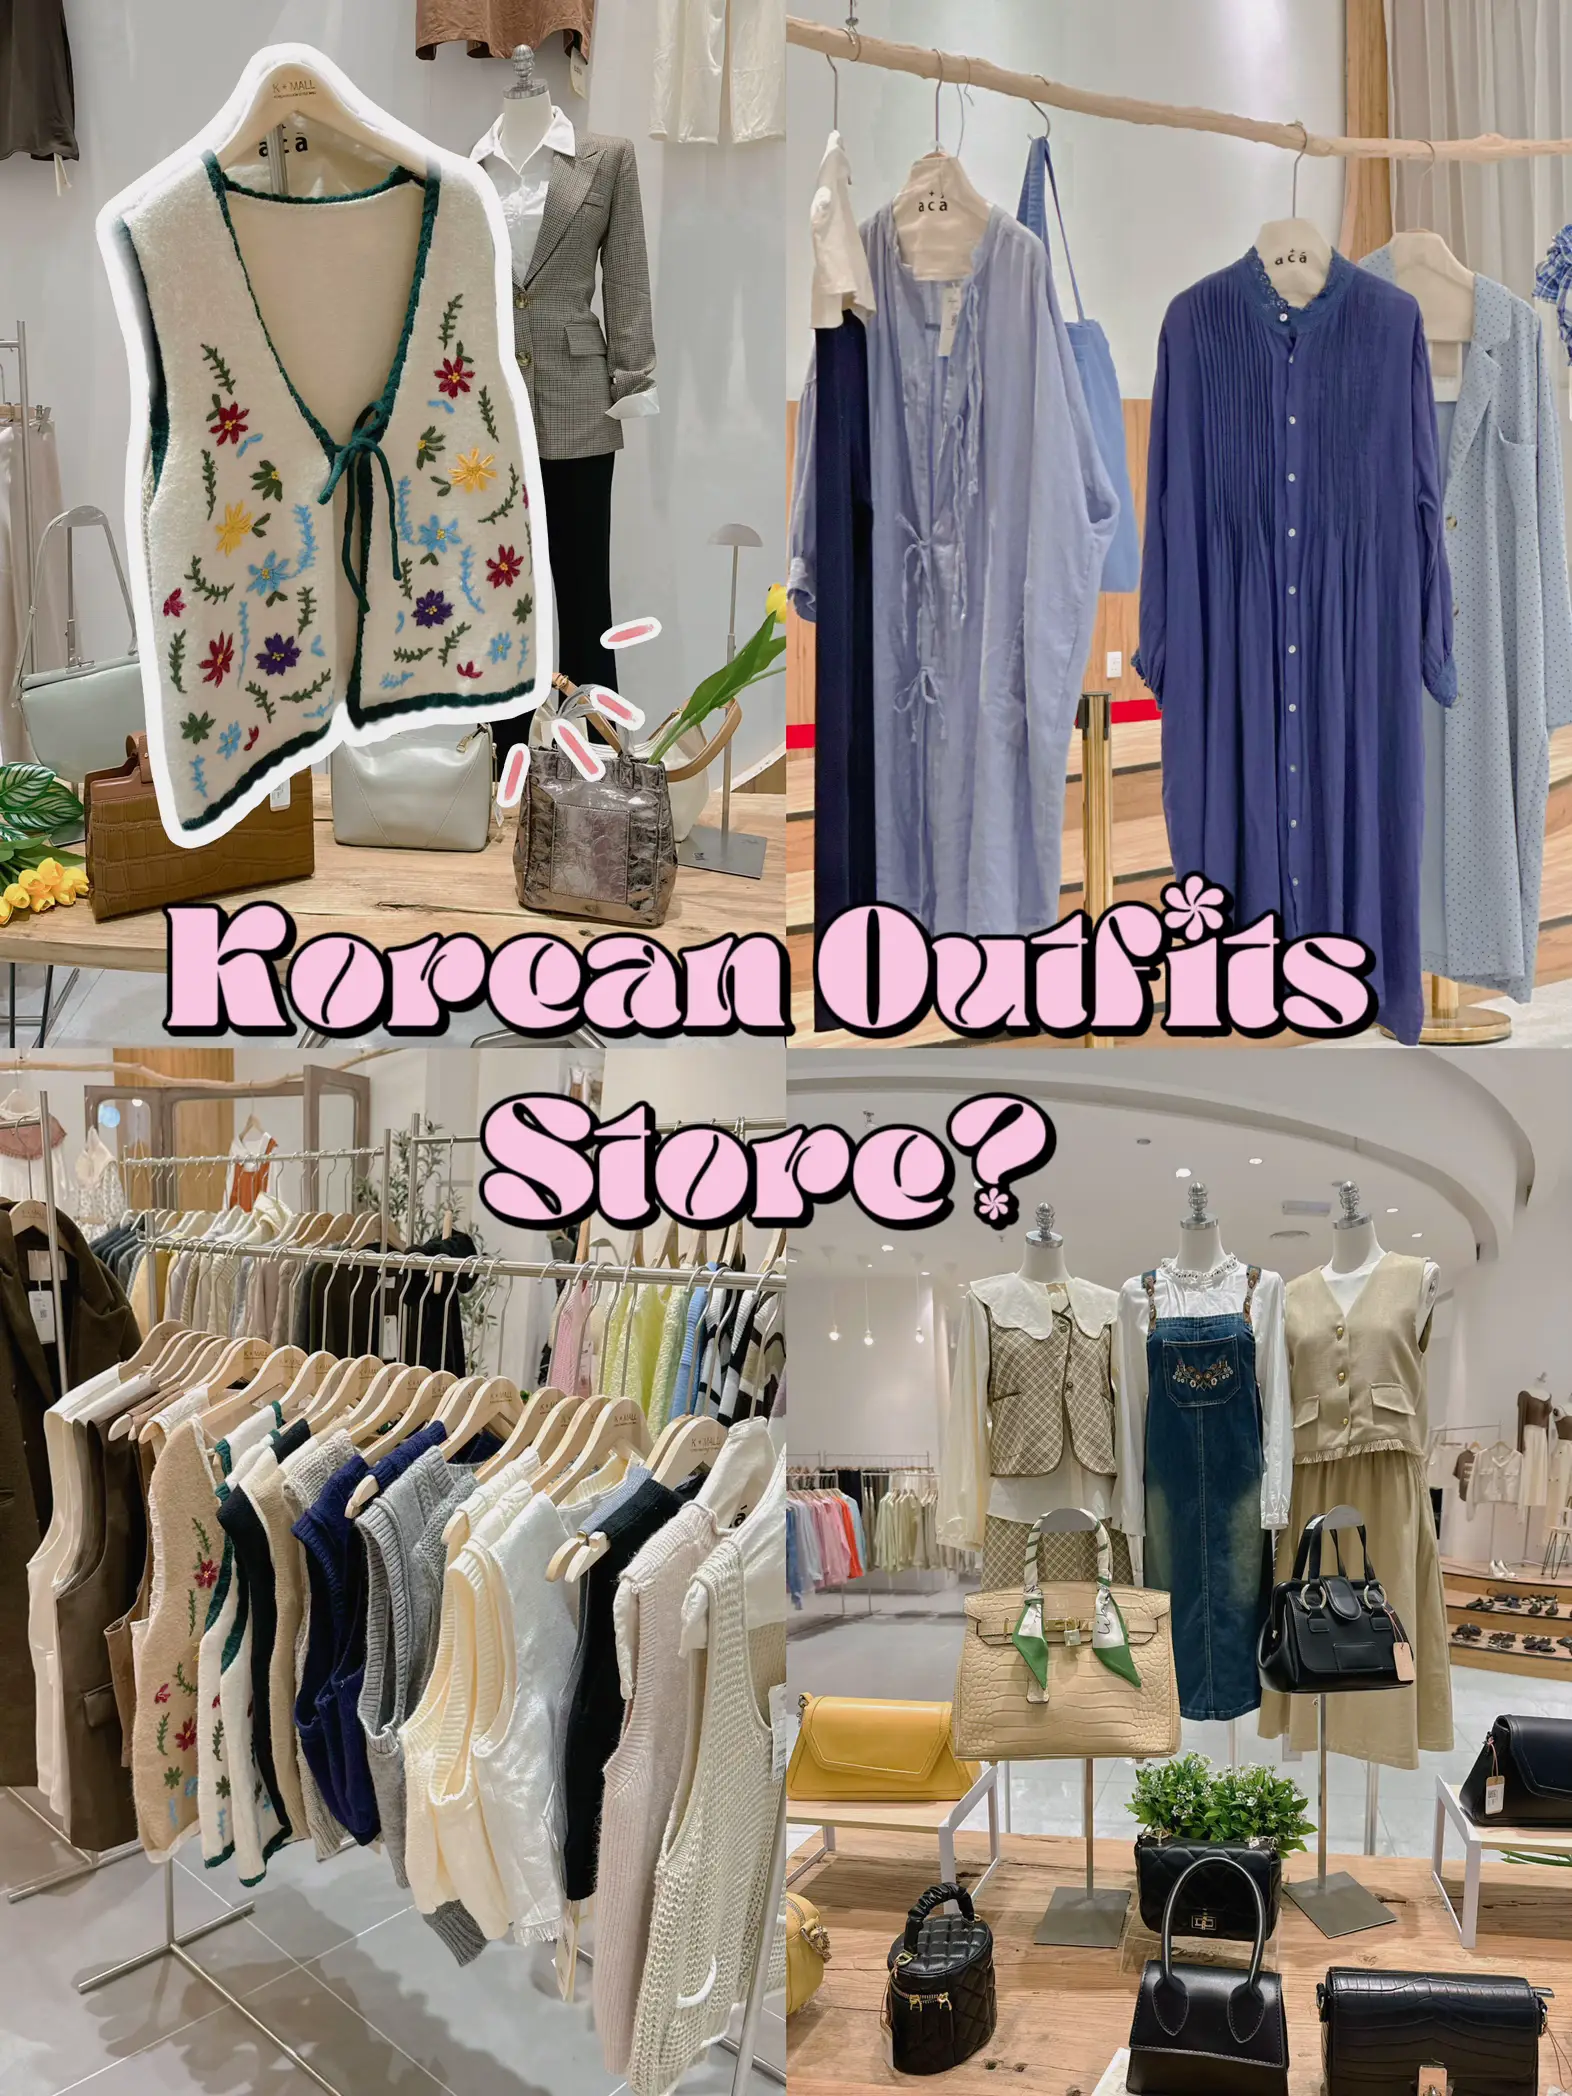 🇰🇷Why are Korean clothes so big and long?